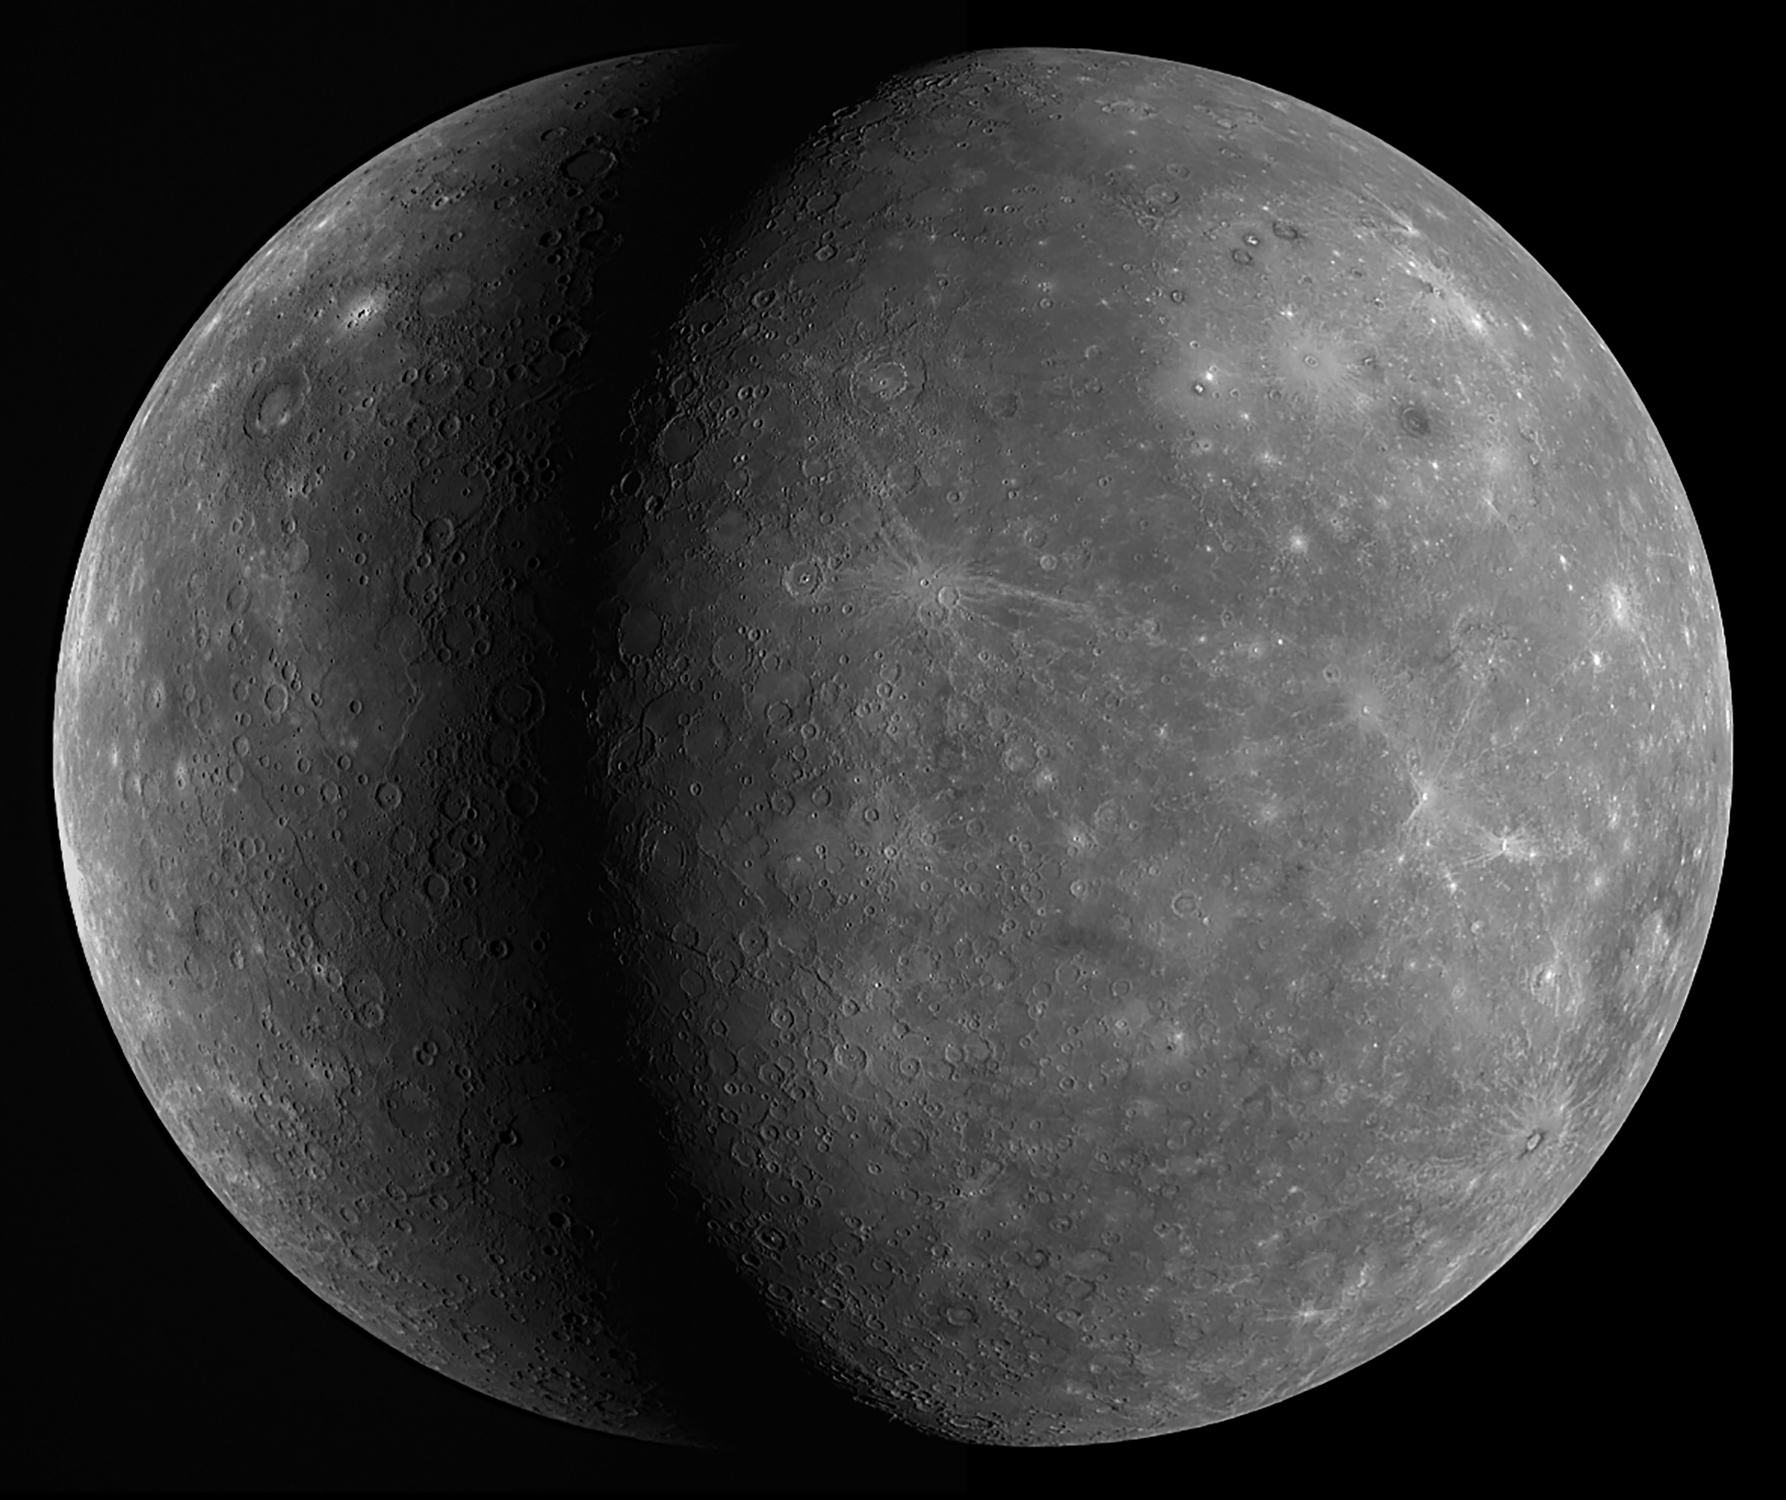 Overlapping images of the planet Mercury